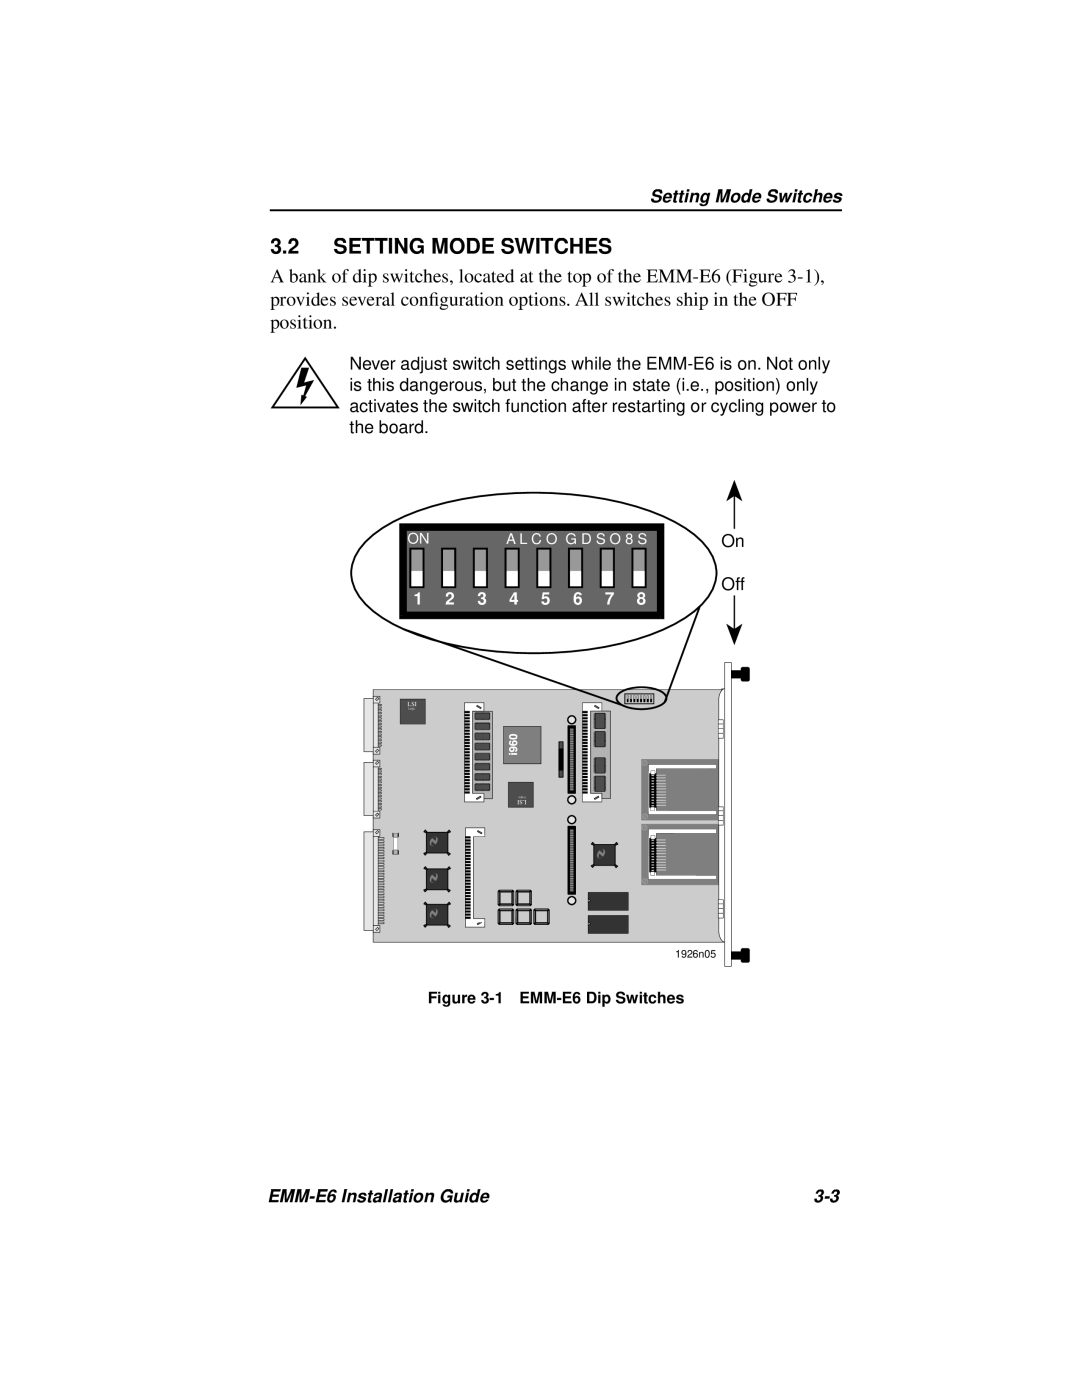 Cabletron Systems manual Setting Mode Switches, EMM-E6 Installation Guide 